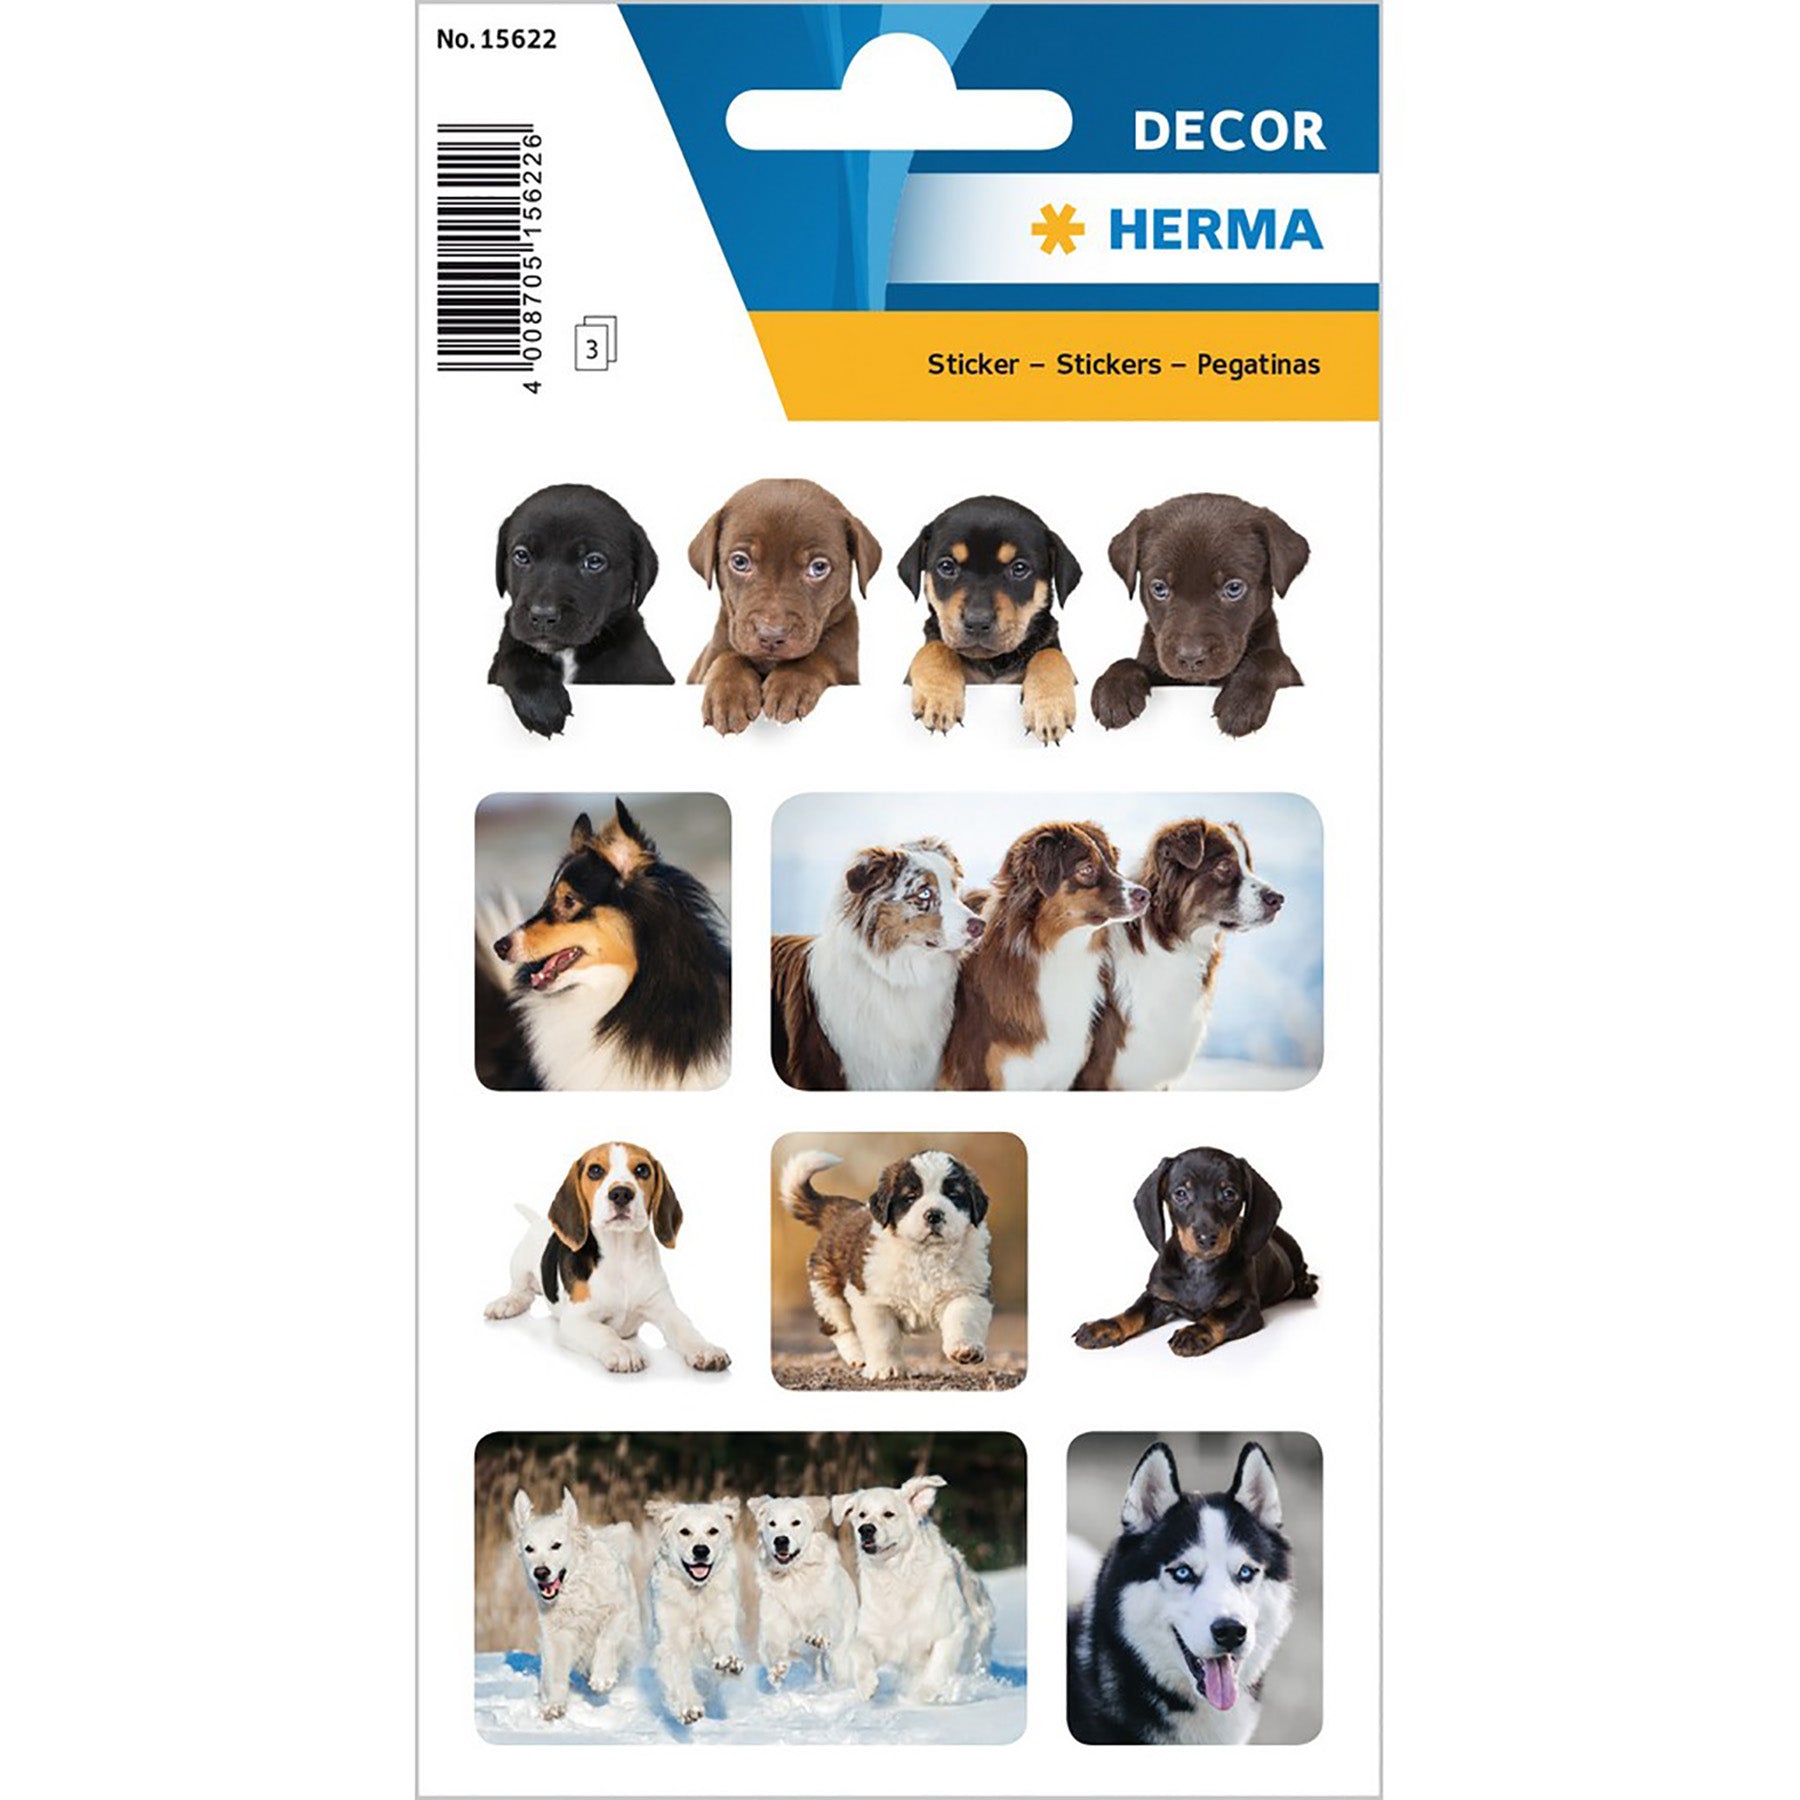 Herma Décor 3 Sheets Stickers Dog Favorites 4.75x3.1in Sheet